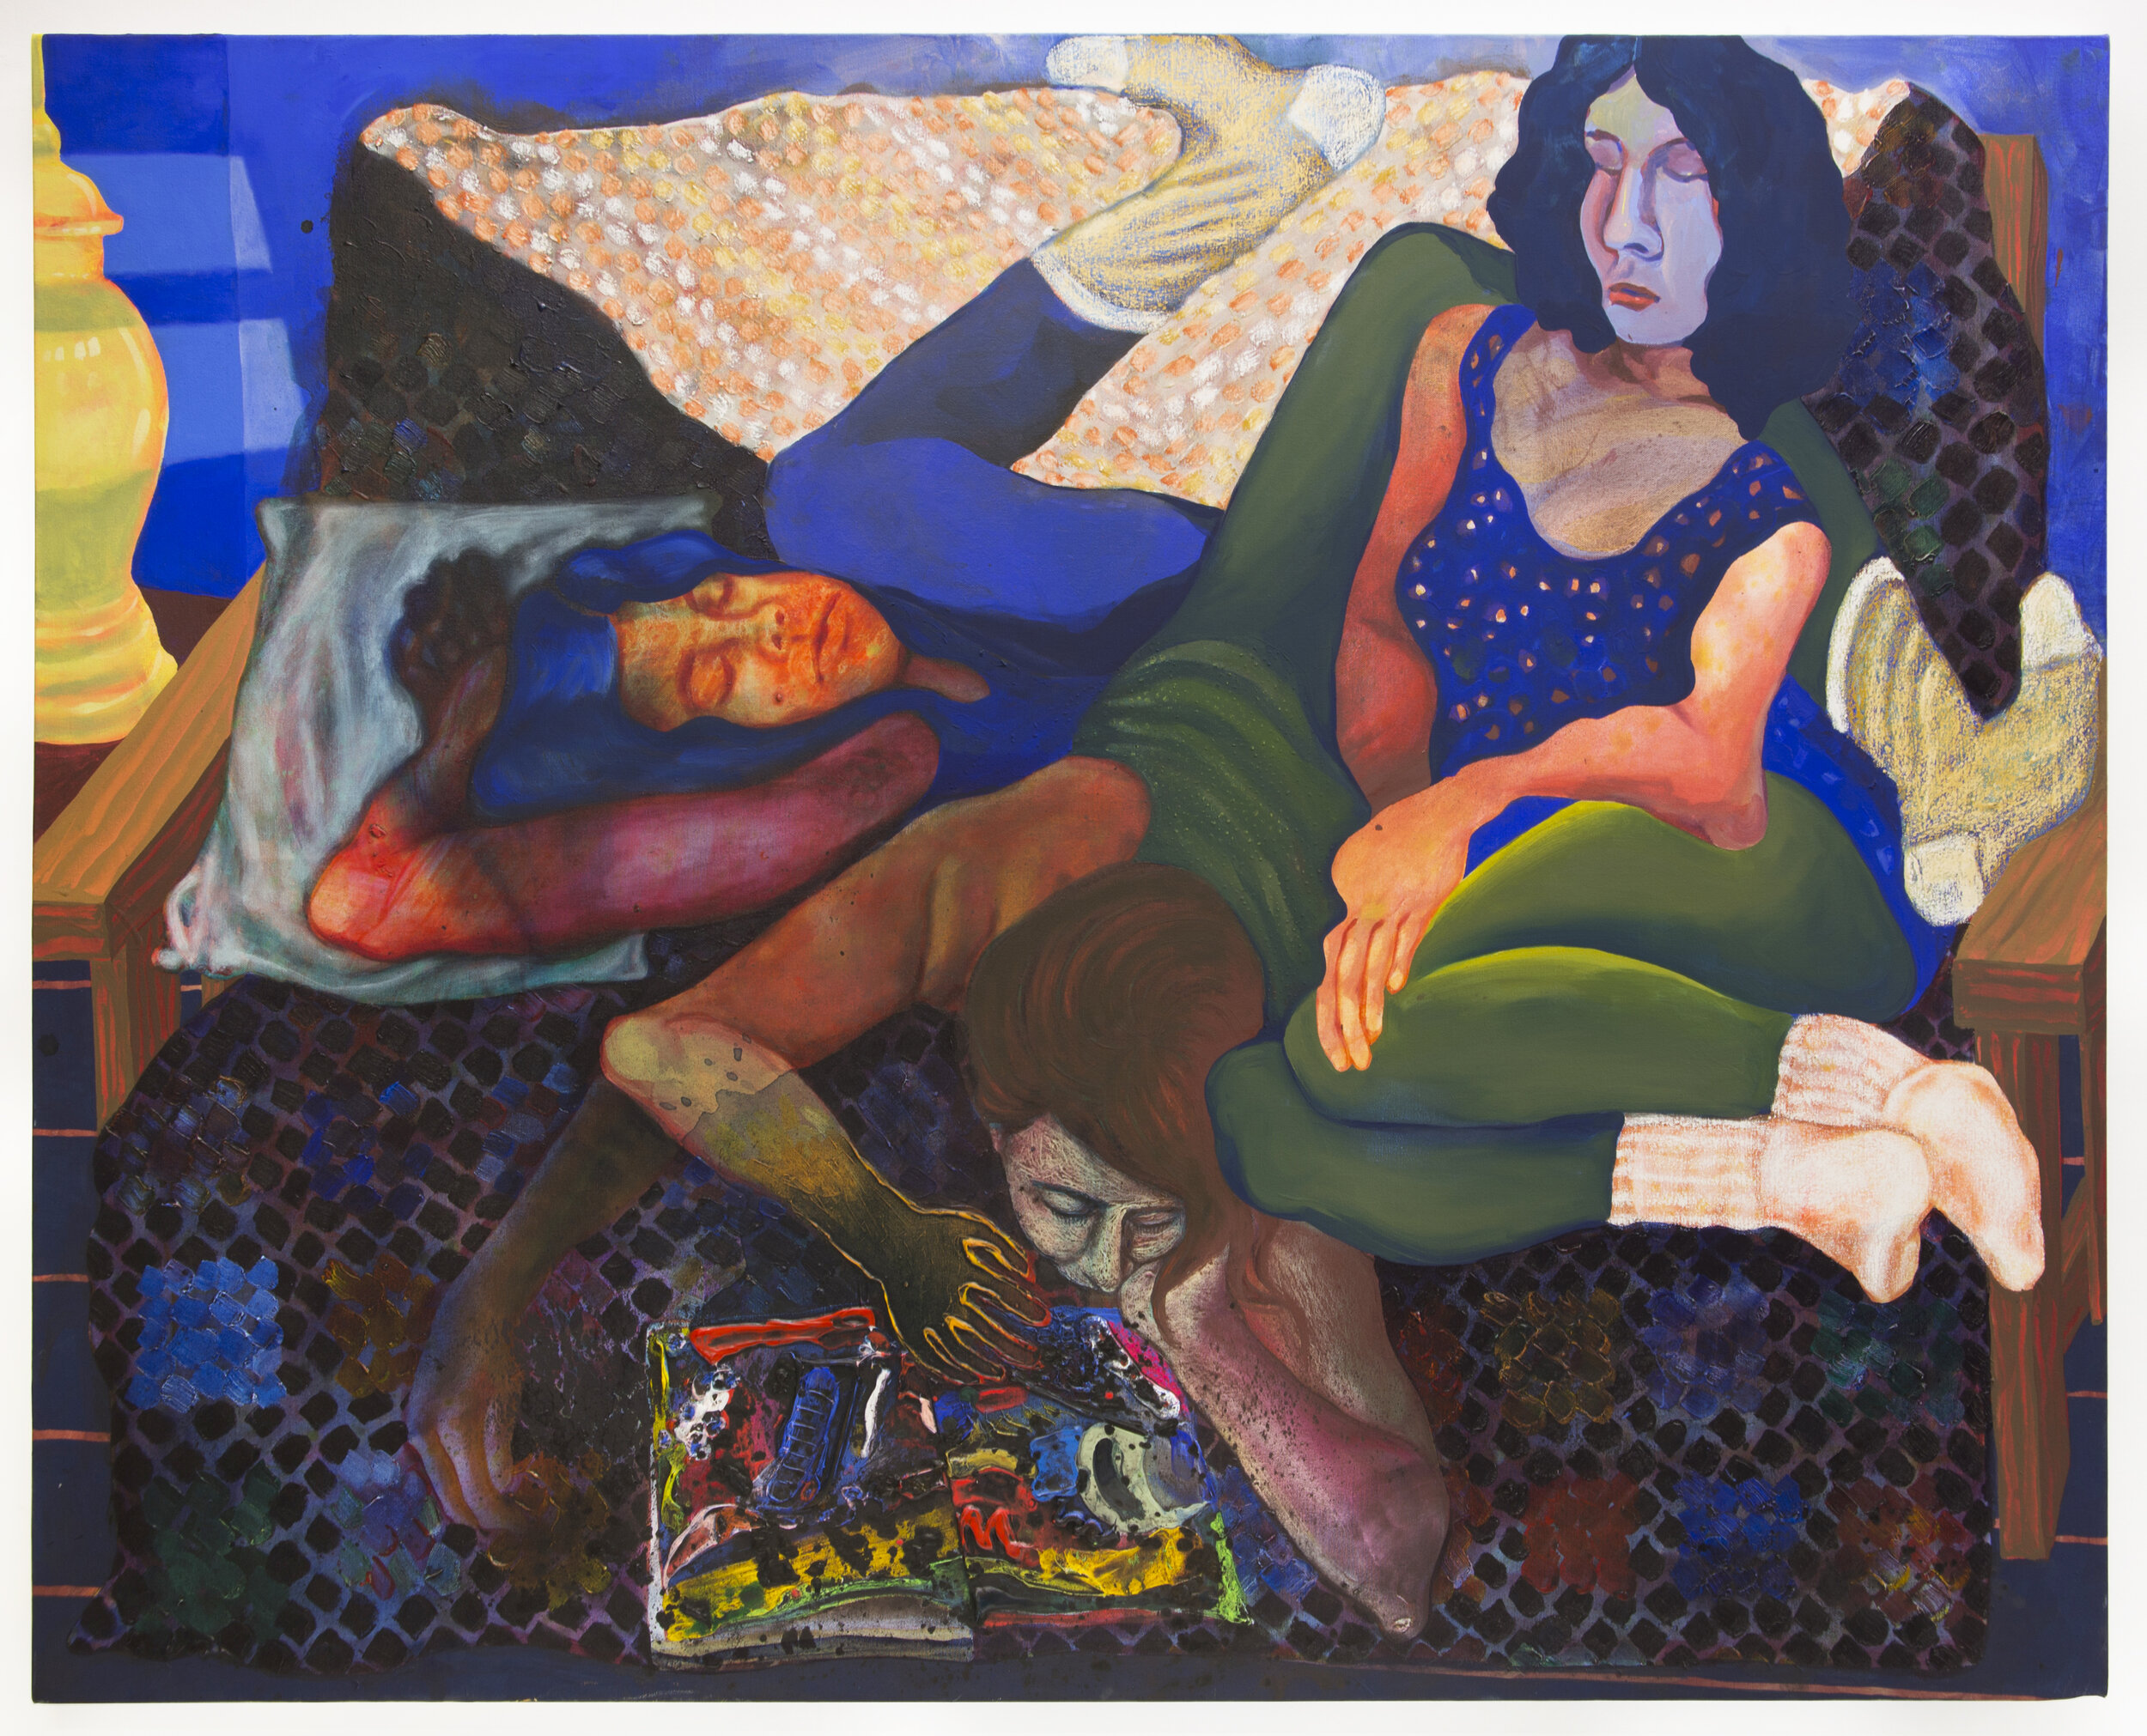   Laid Out (Sprawling Thoughts)   acrylic, oil, and vinyl emulsion on canvas  48 x 60 in / 122 x 152.5 cm   